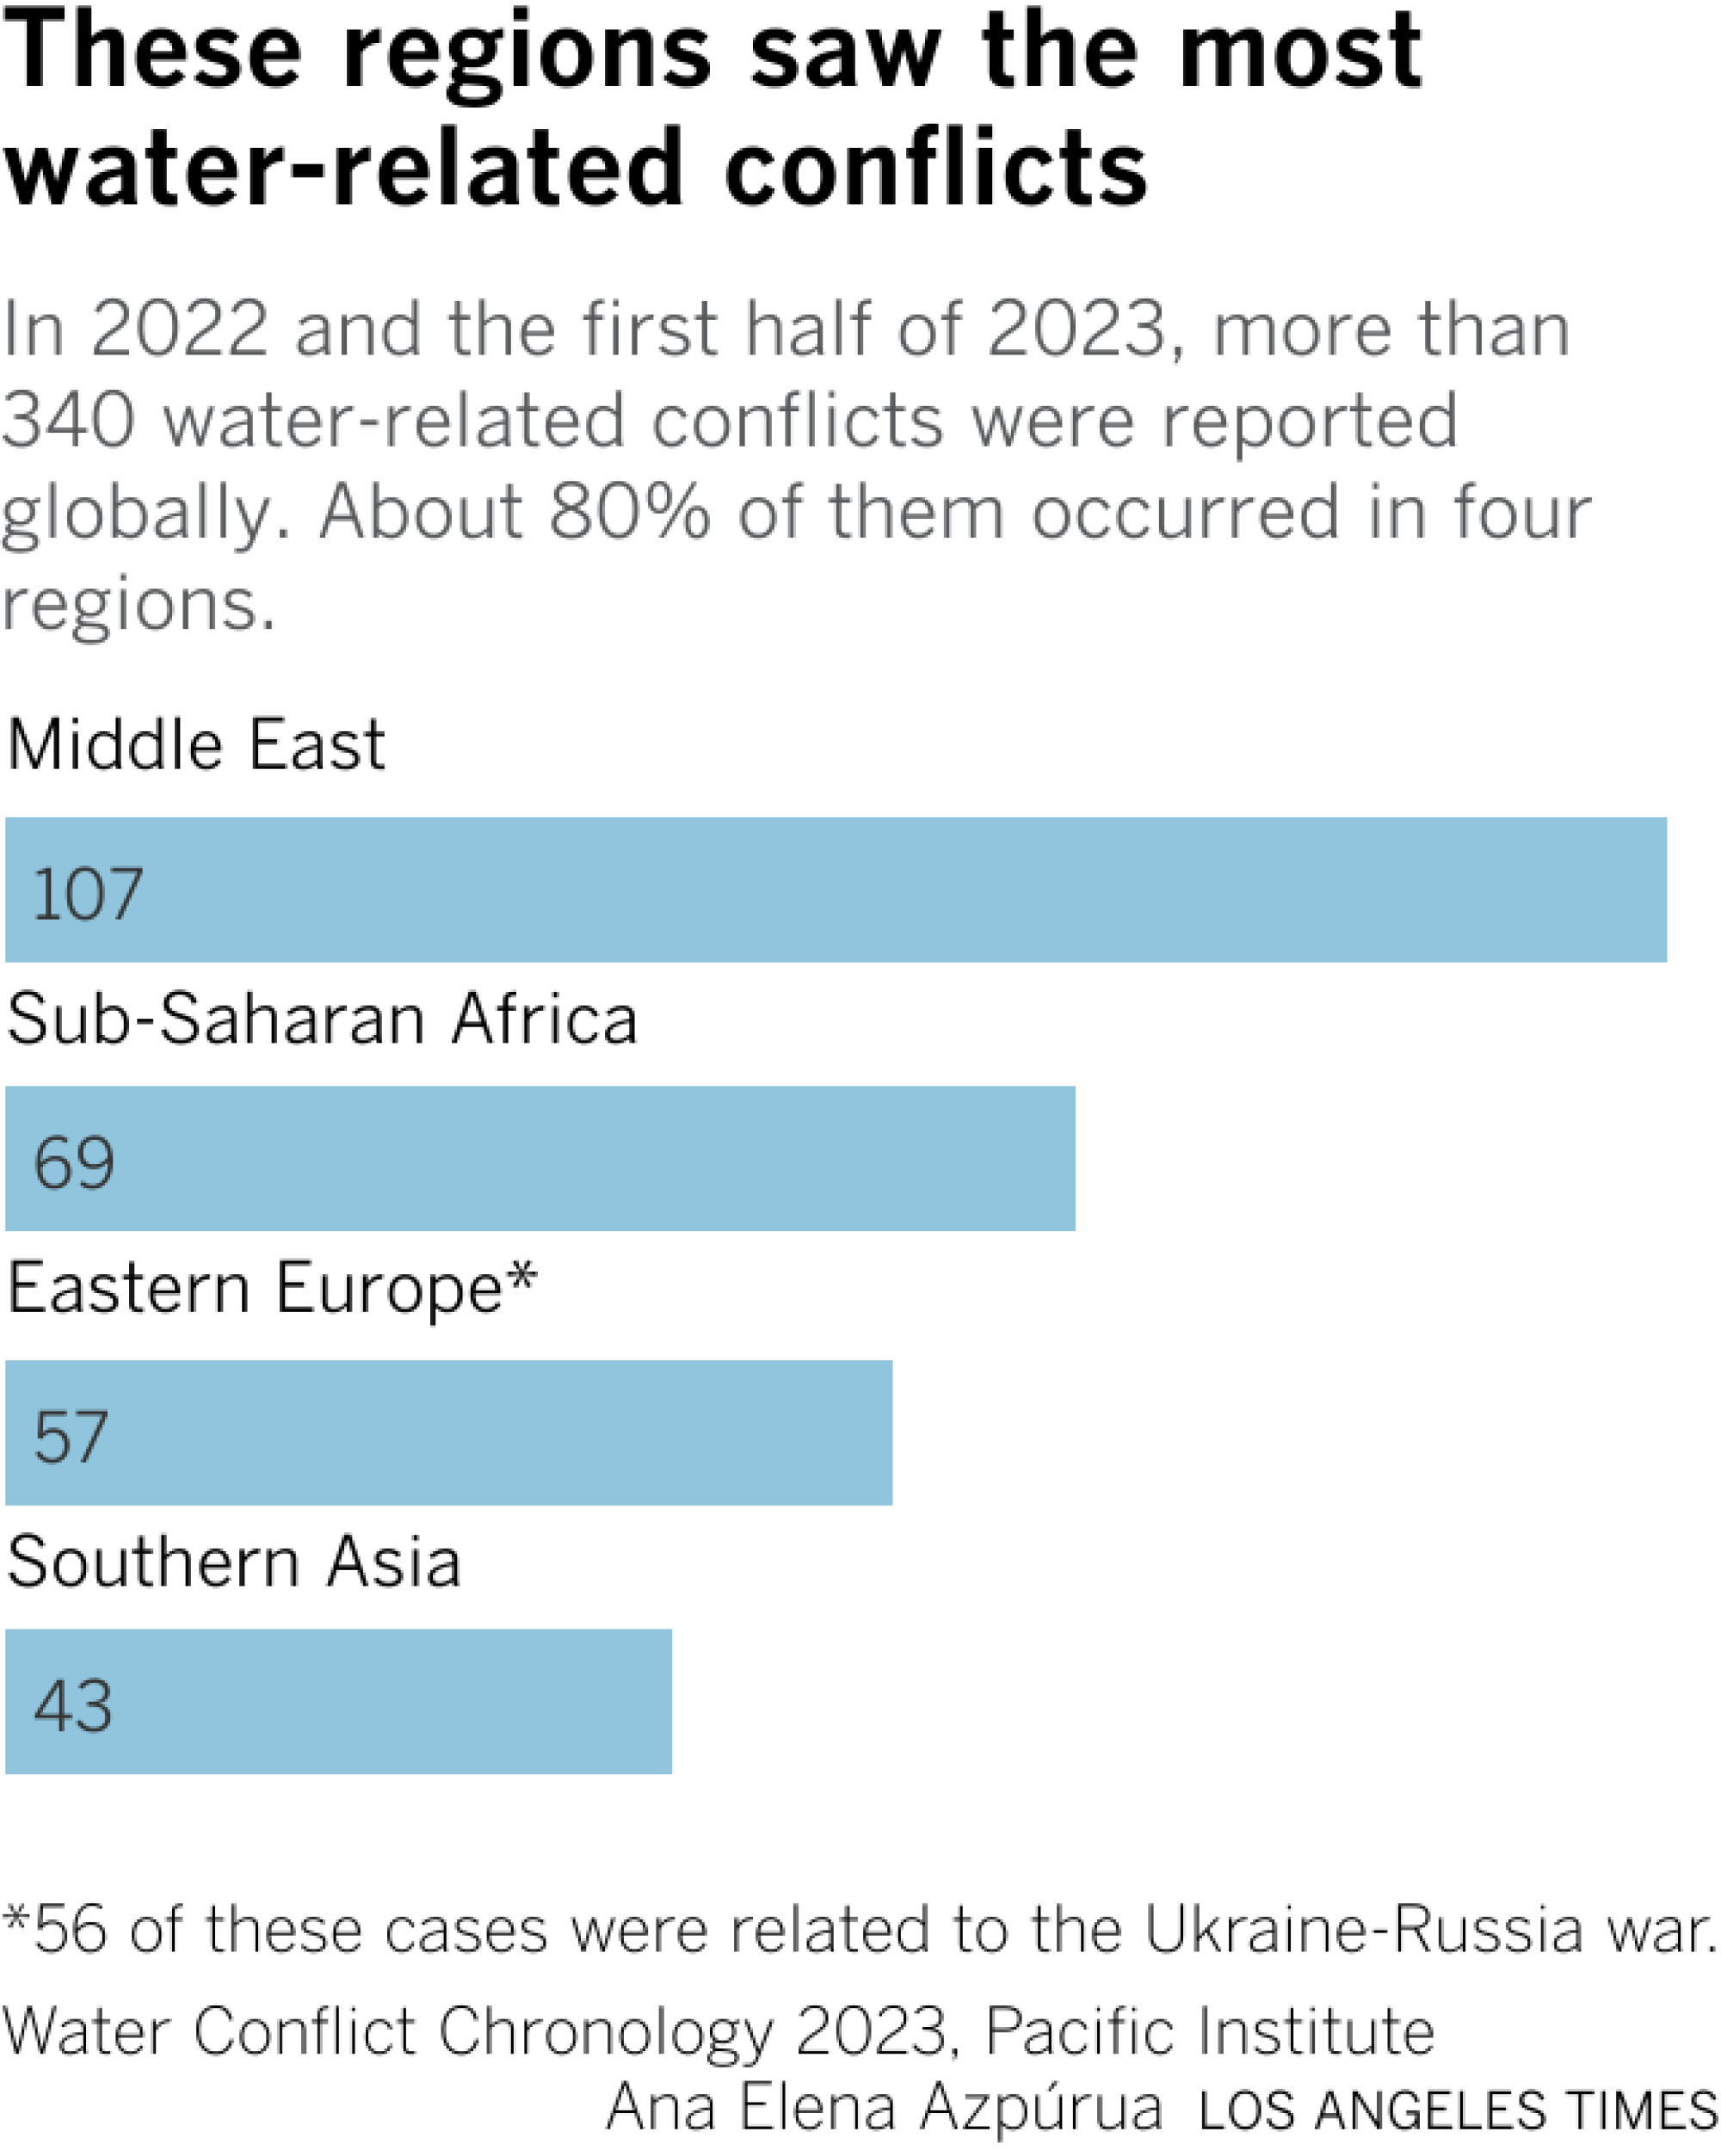 A bar chart showing the top areas for water-related conflicts in 2022 and the first half of 2023. The Middle East has the highest number with 107. In Ukraine-Russia, 56 incidents were recorded through June 2023.